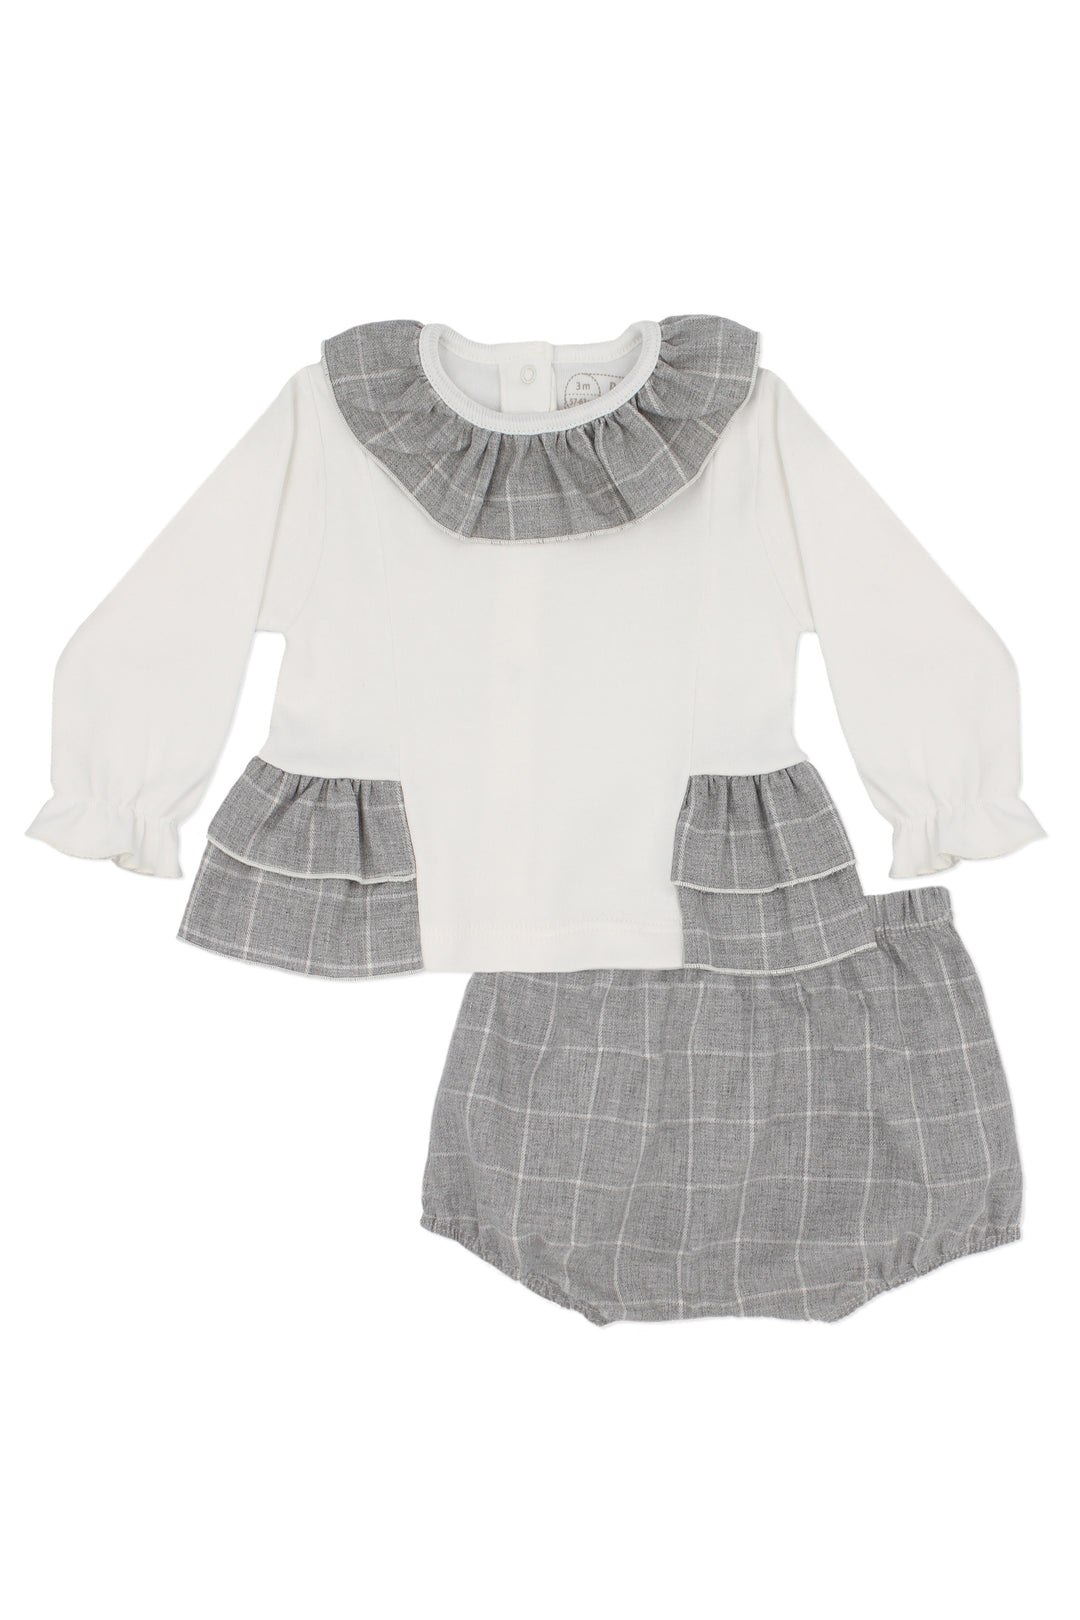 Rapife "Clara" Grey Checked Blouse & Bloomers | Millie and John